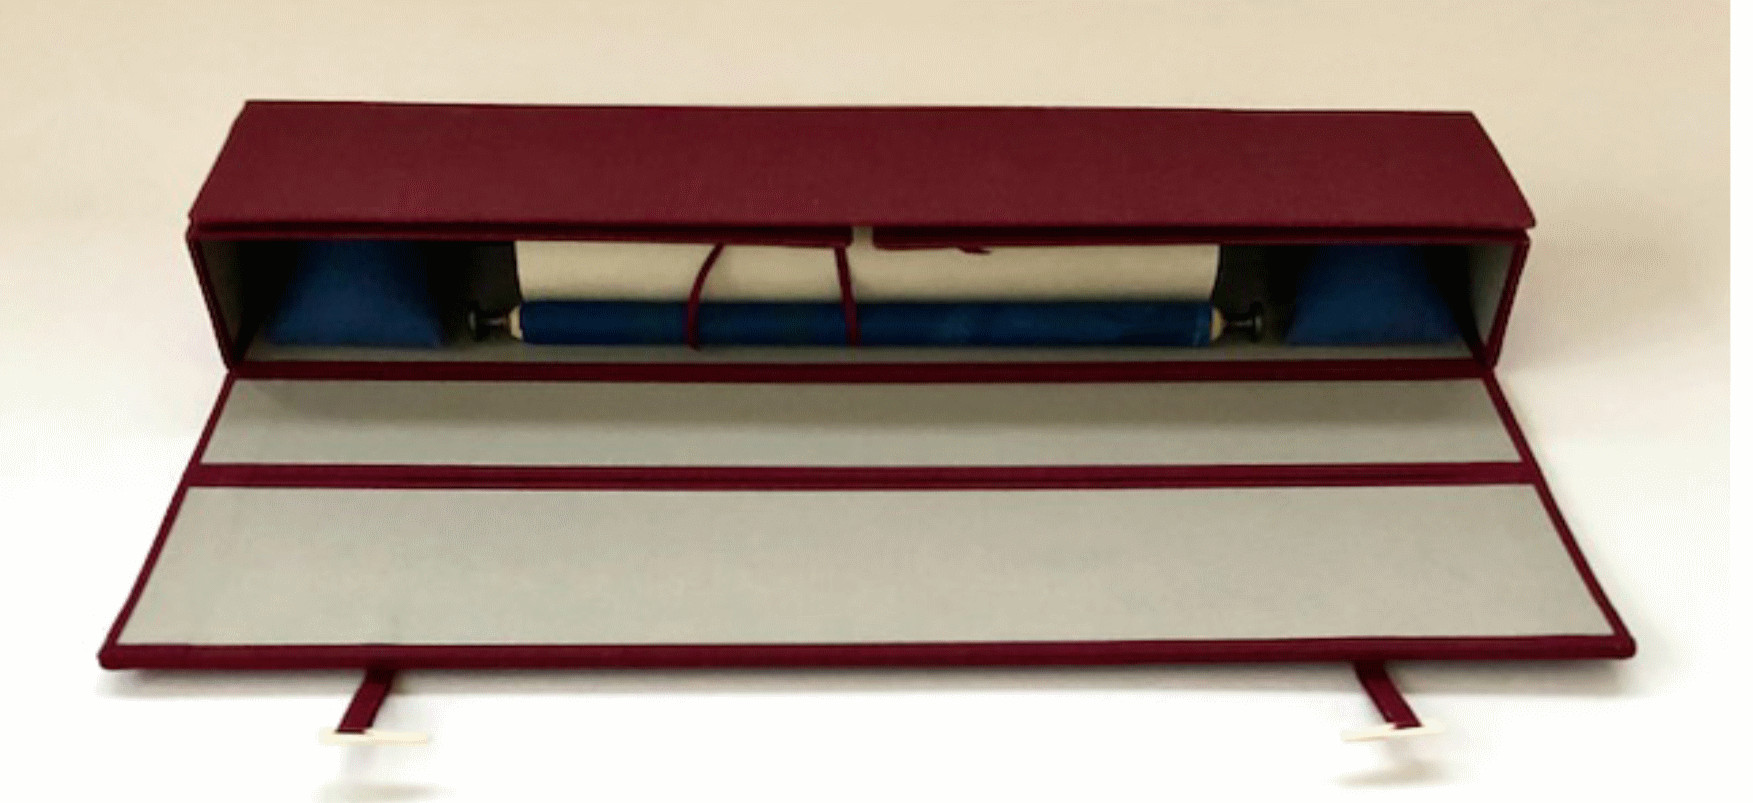 Scrolls contained in box